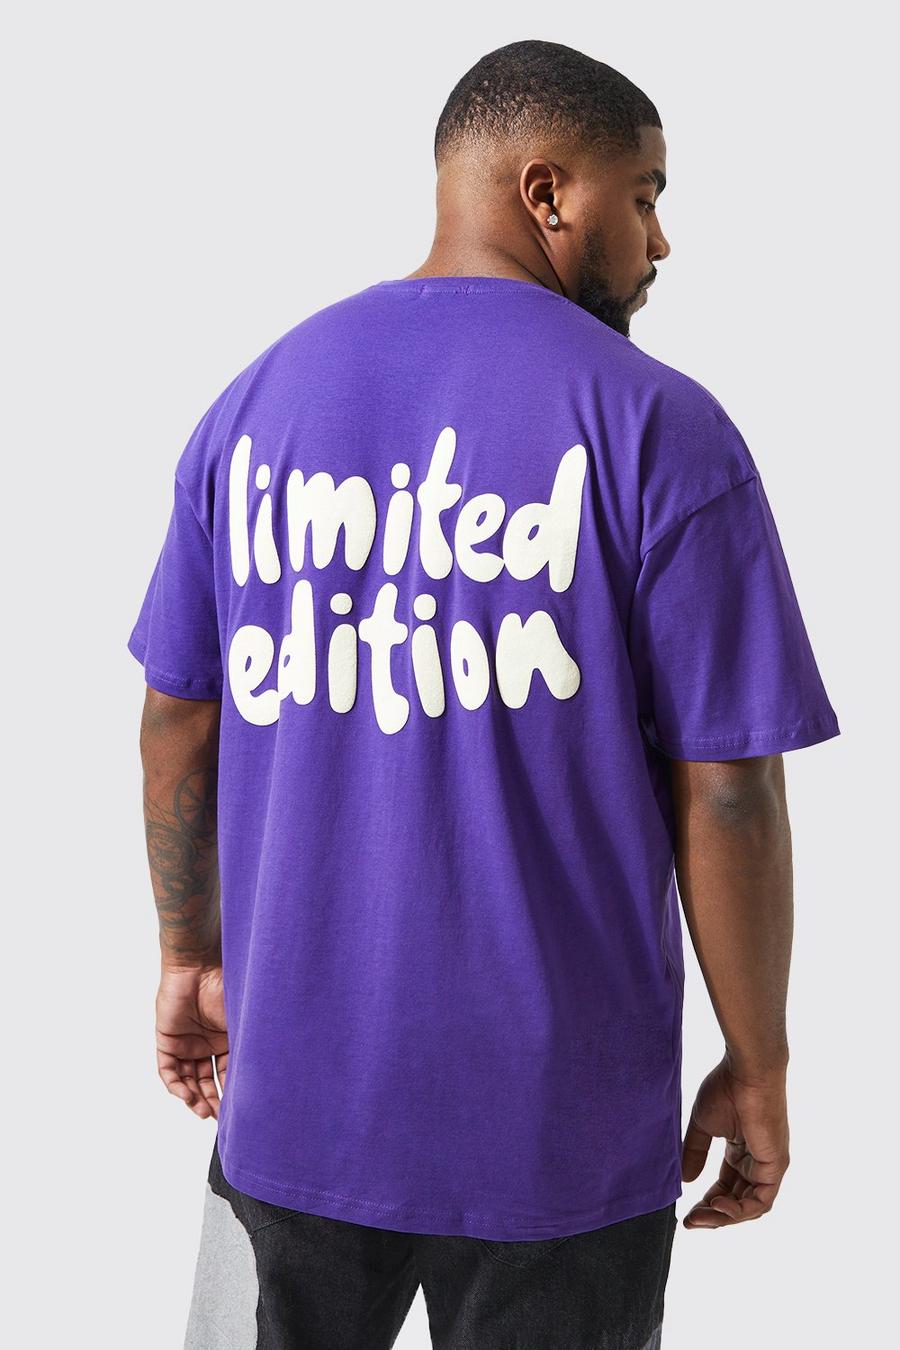 T-shirt Plus Size Limited Edition con maniche a sbuffo, Purple morado image number 1